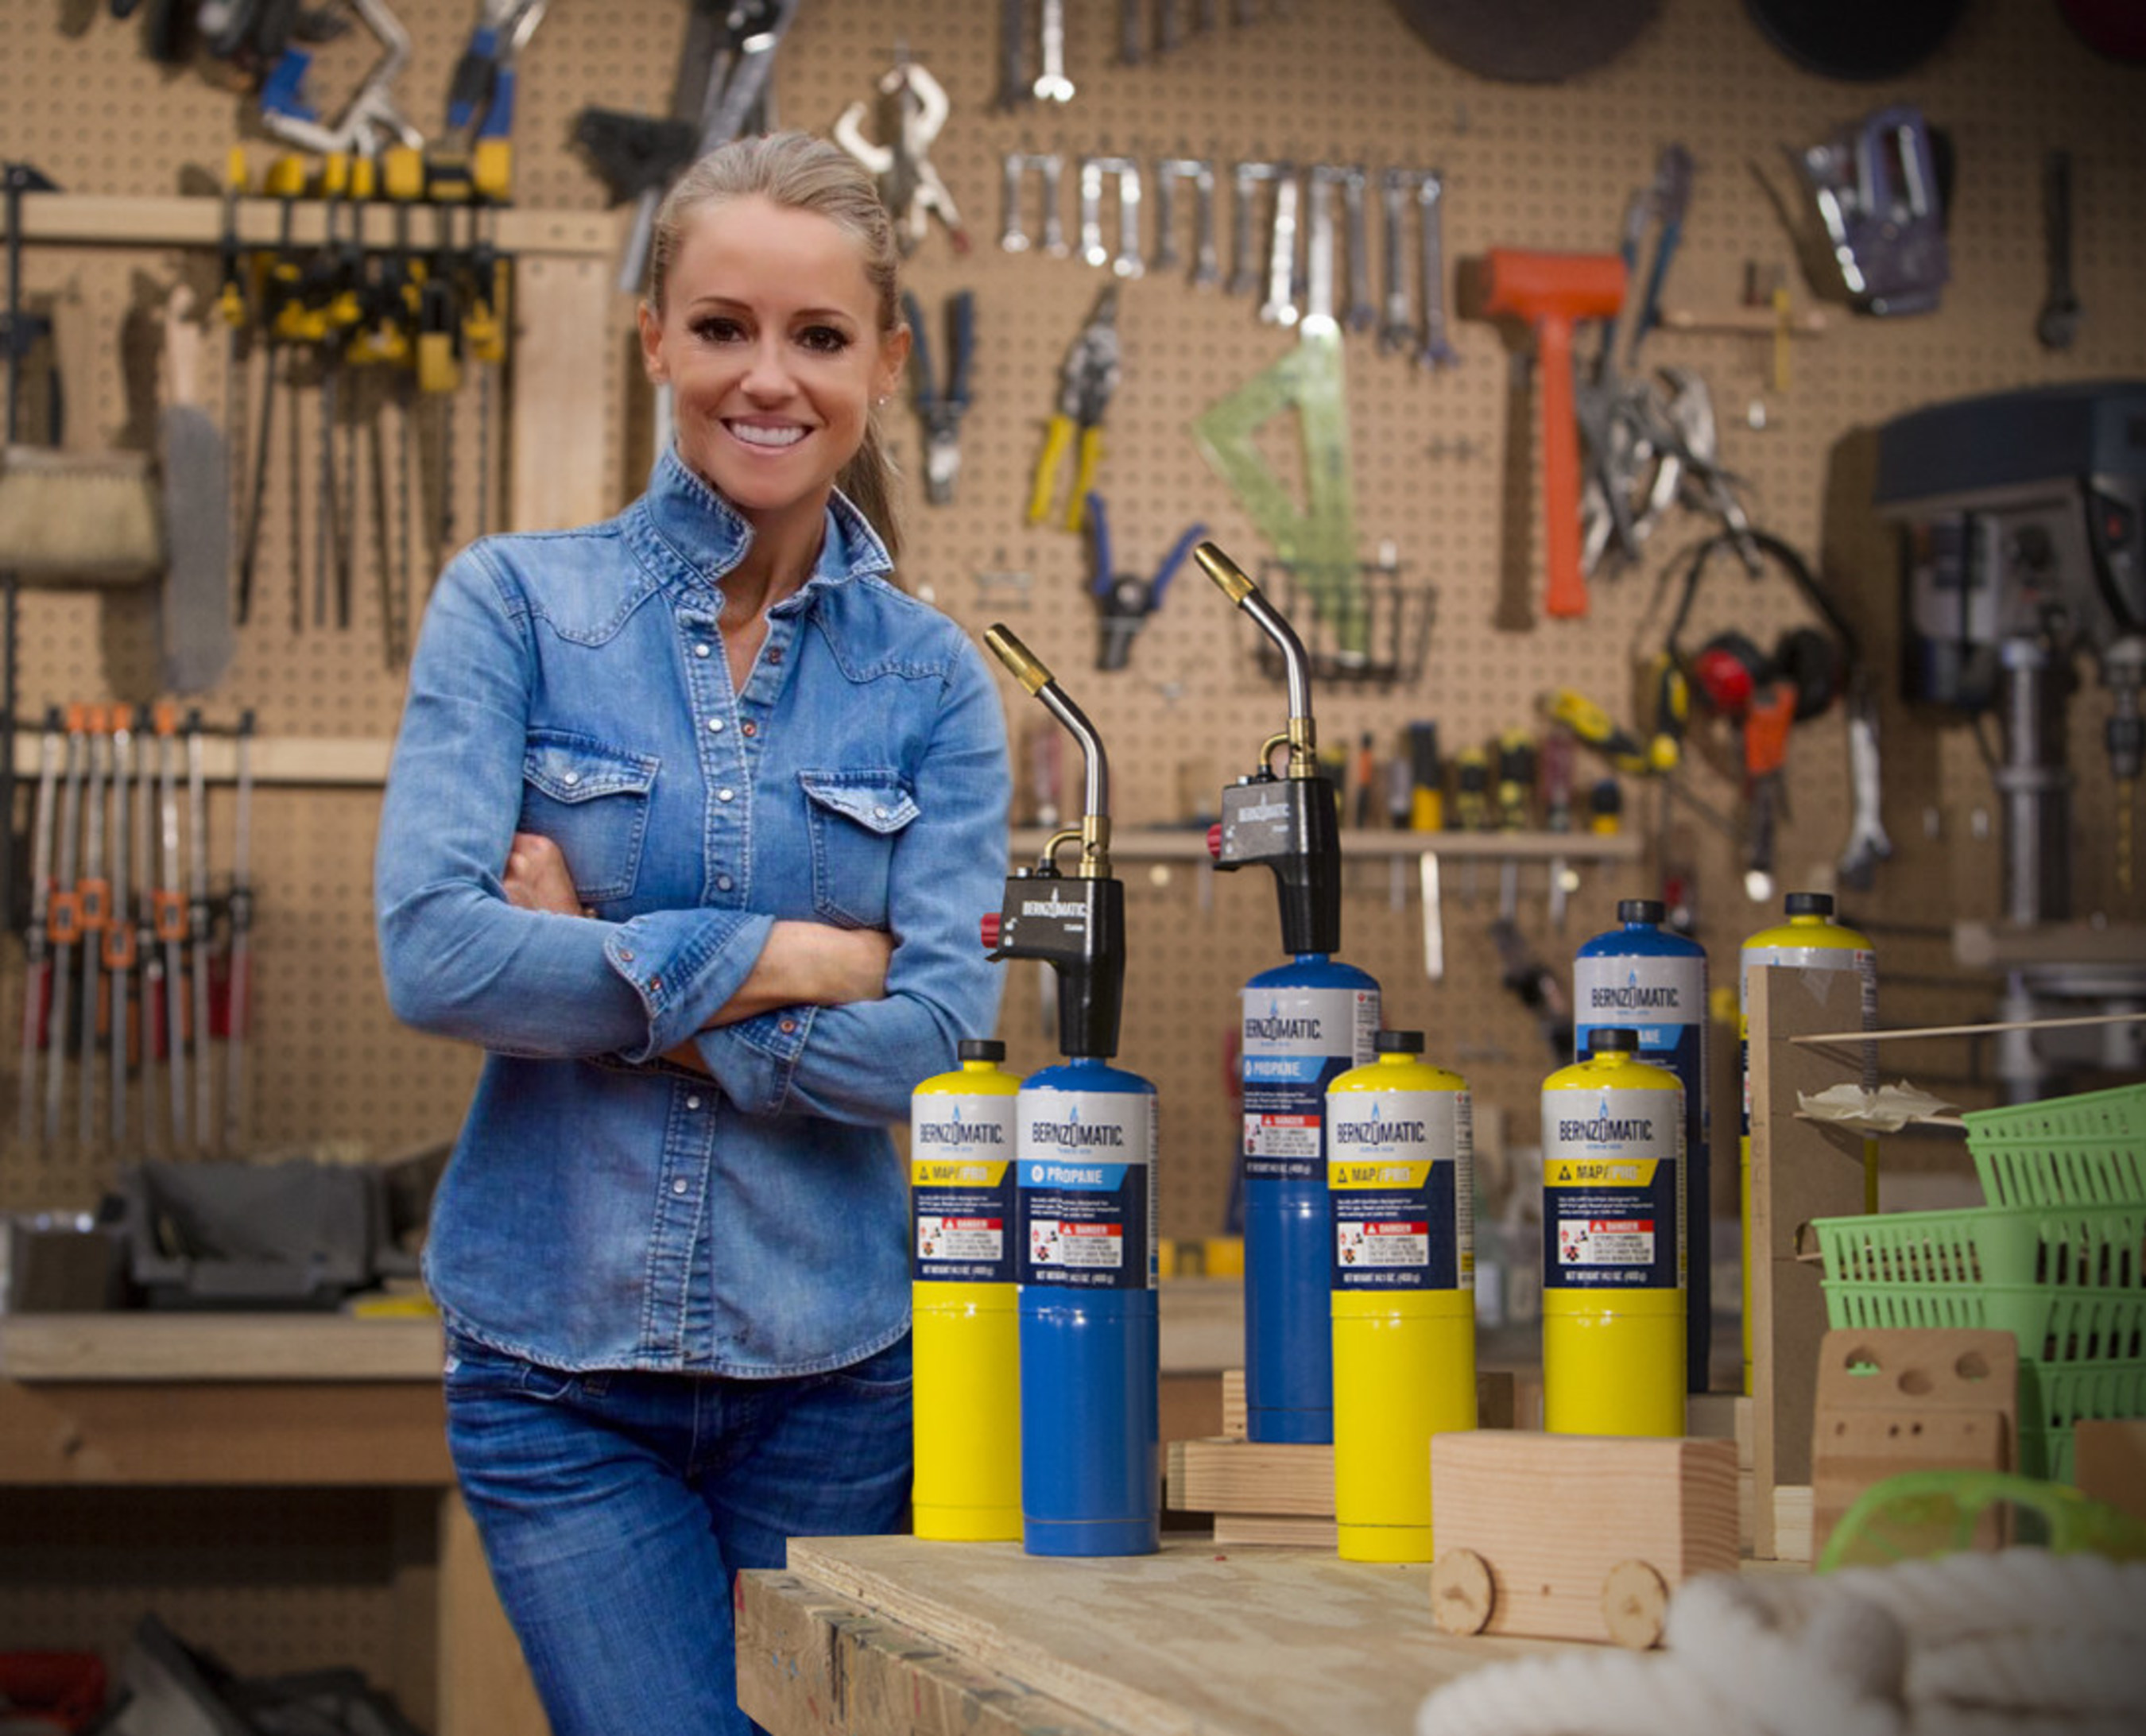 TV Home Rehabber Nicole Curtis partners with Bernzomatic to launch the Find Your Fire Community Grants program. Submit a community minded maker project that involves the use of a torch in some way at Bernzomatic.com/Grants. The top three projects -- voted on by the public -- will receive a grant of $15,000, $7,500 and $5,000 plus Bernzomatic products to bring it to life.